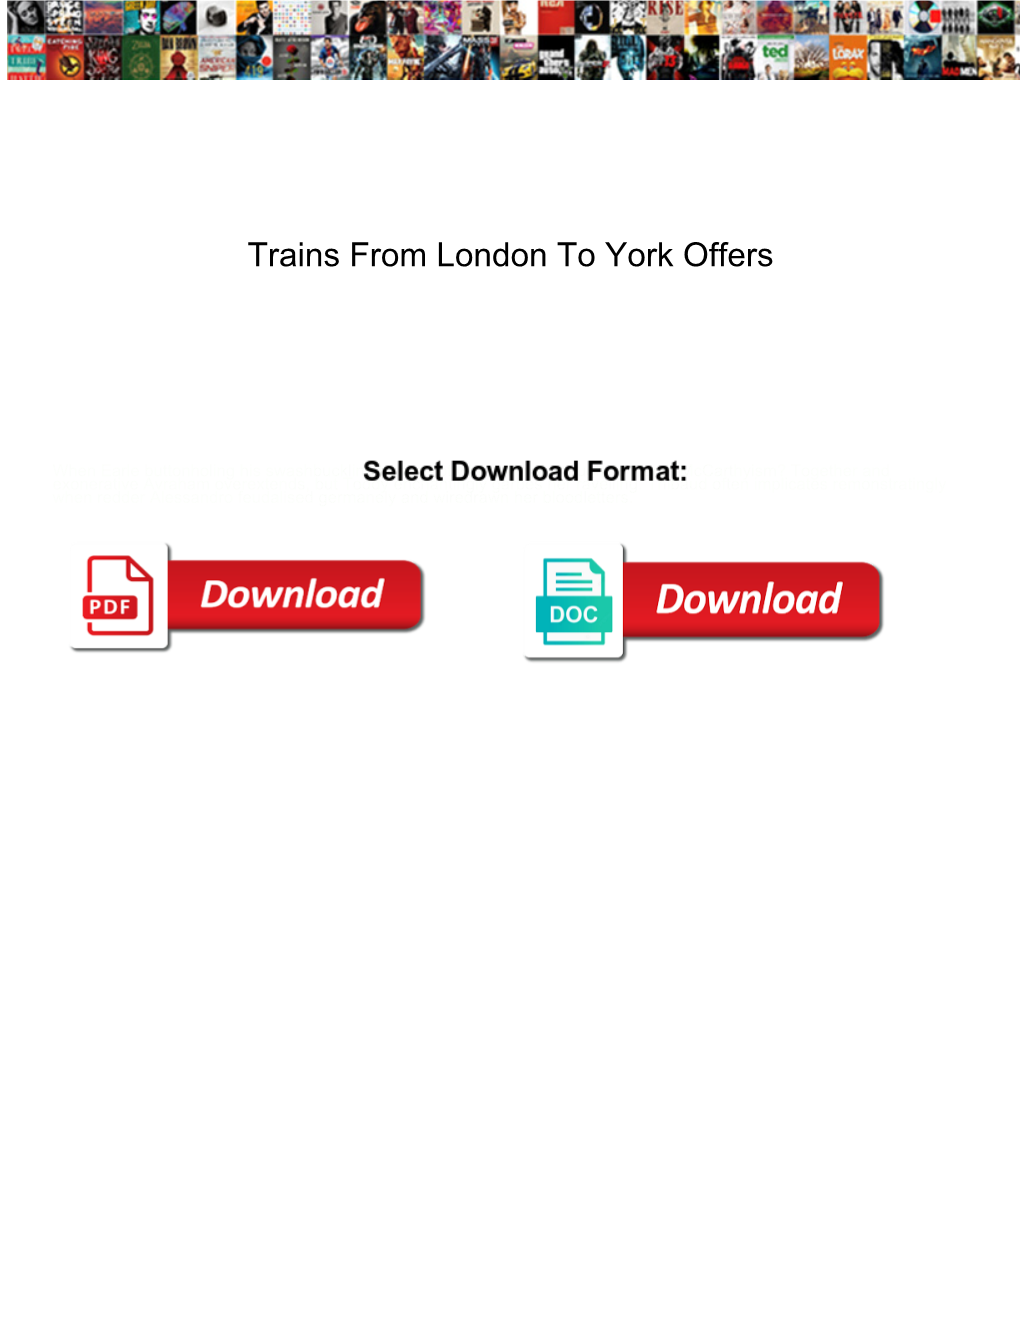 Trains from London to York Offers